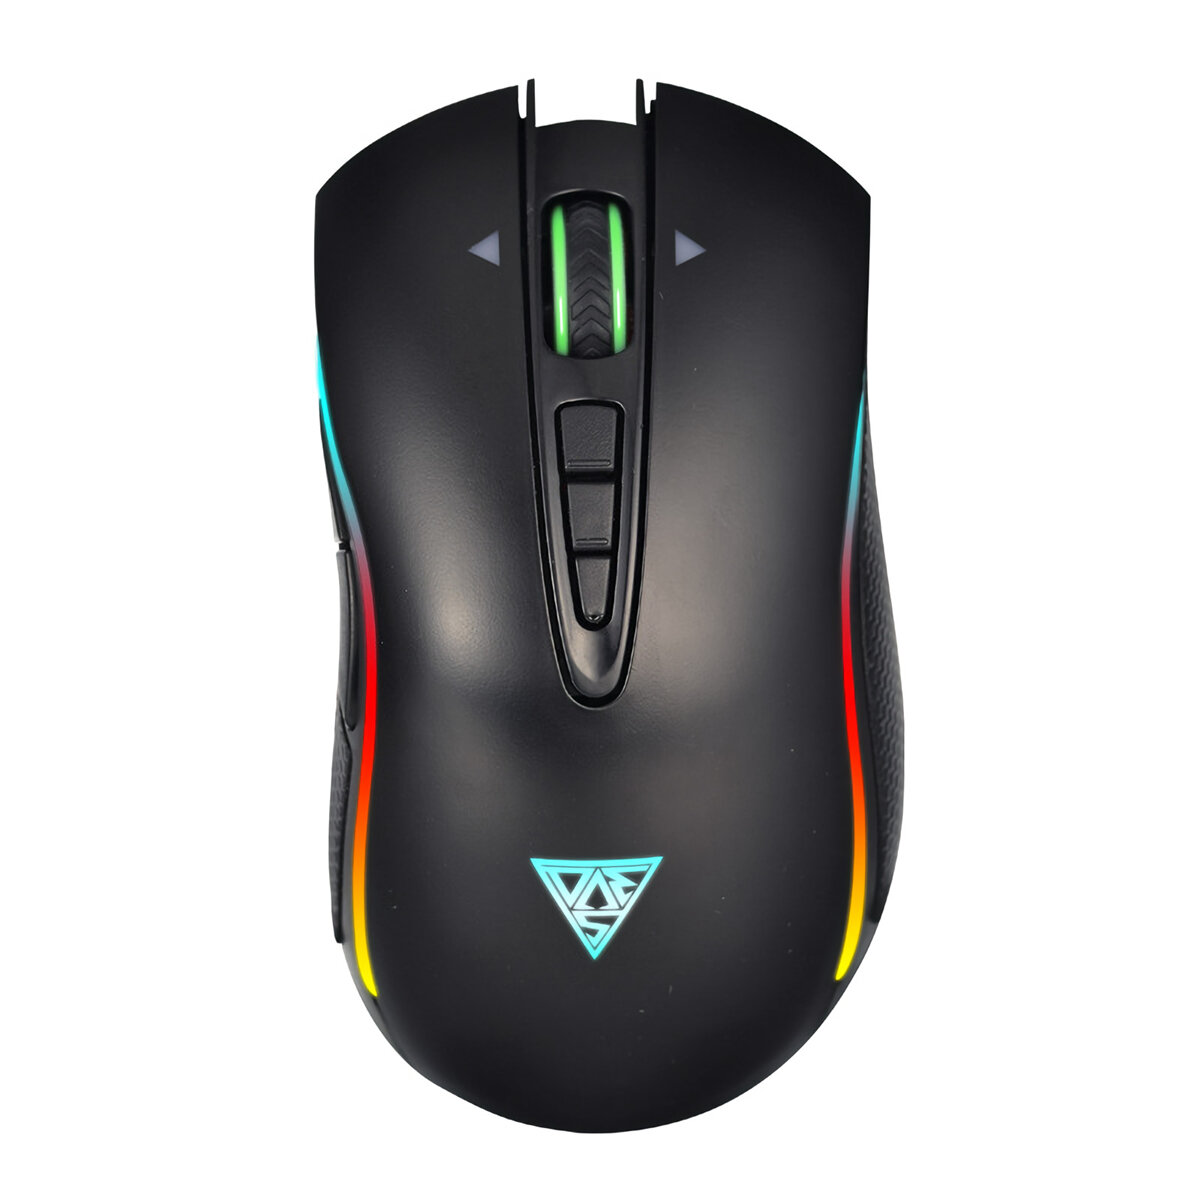 

GAMEDIAS M8 Mamba Gaming Mouse Adjustable 4000DPI 7 Buttons USB Wired RGB Backlit Mouse for Home Office